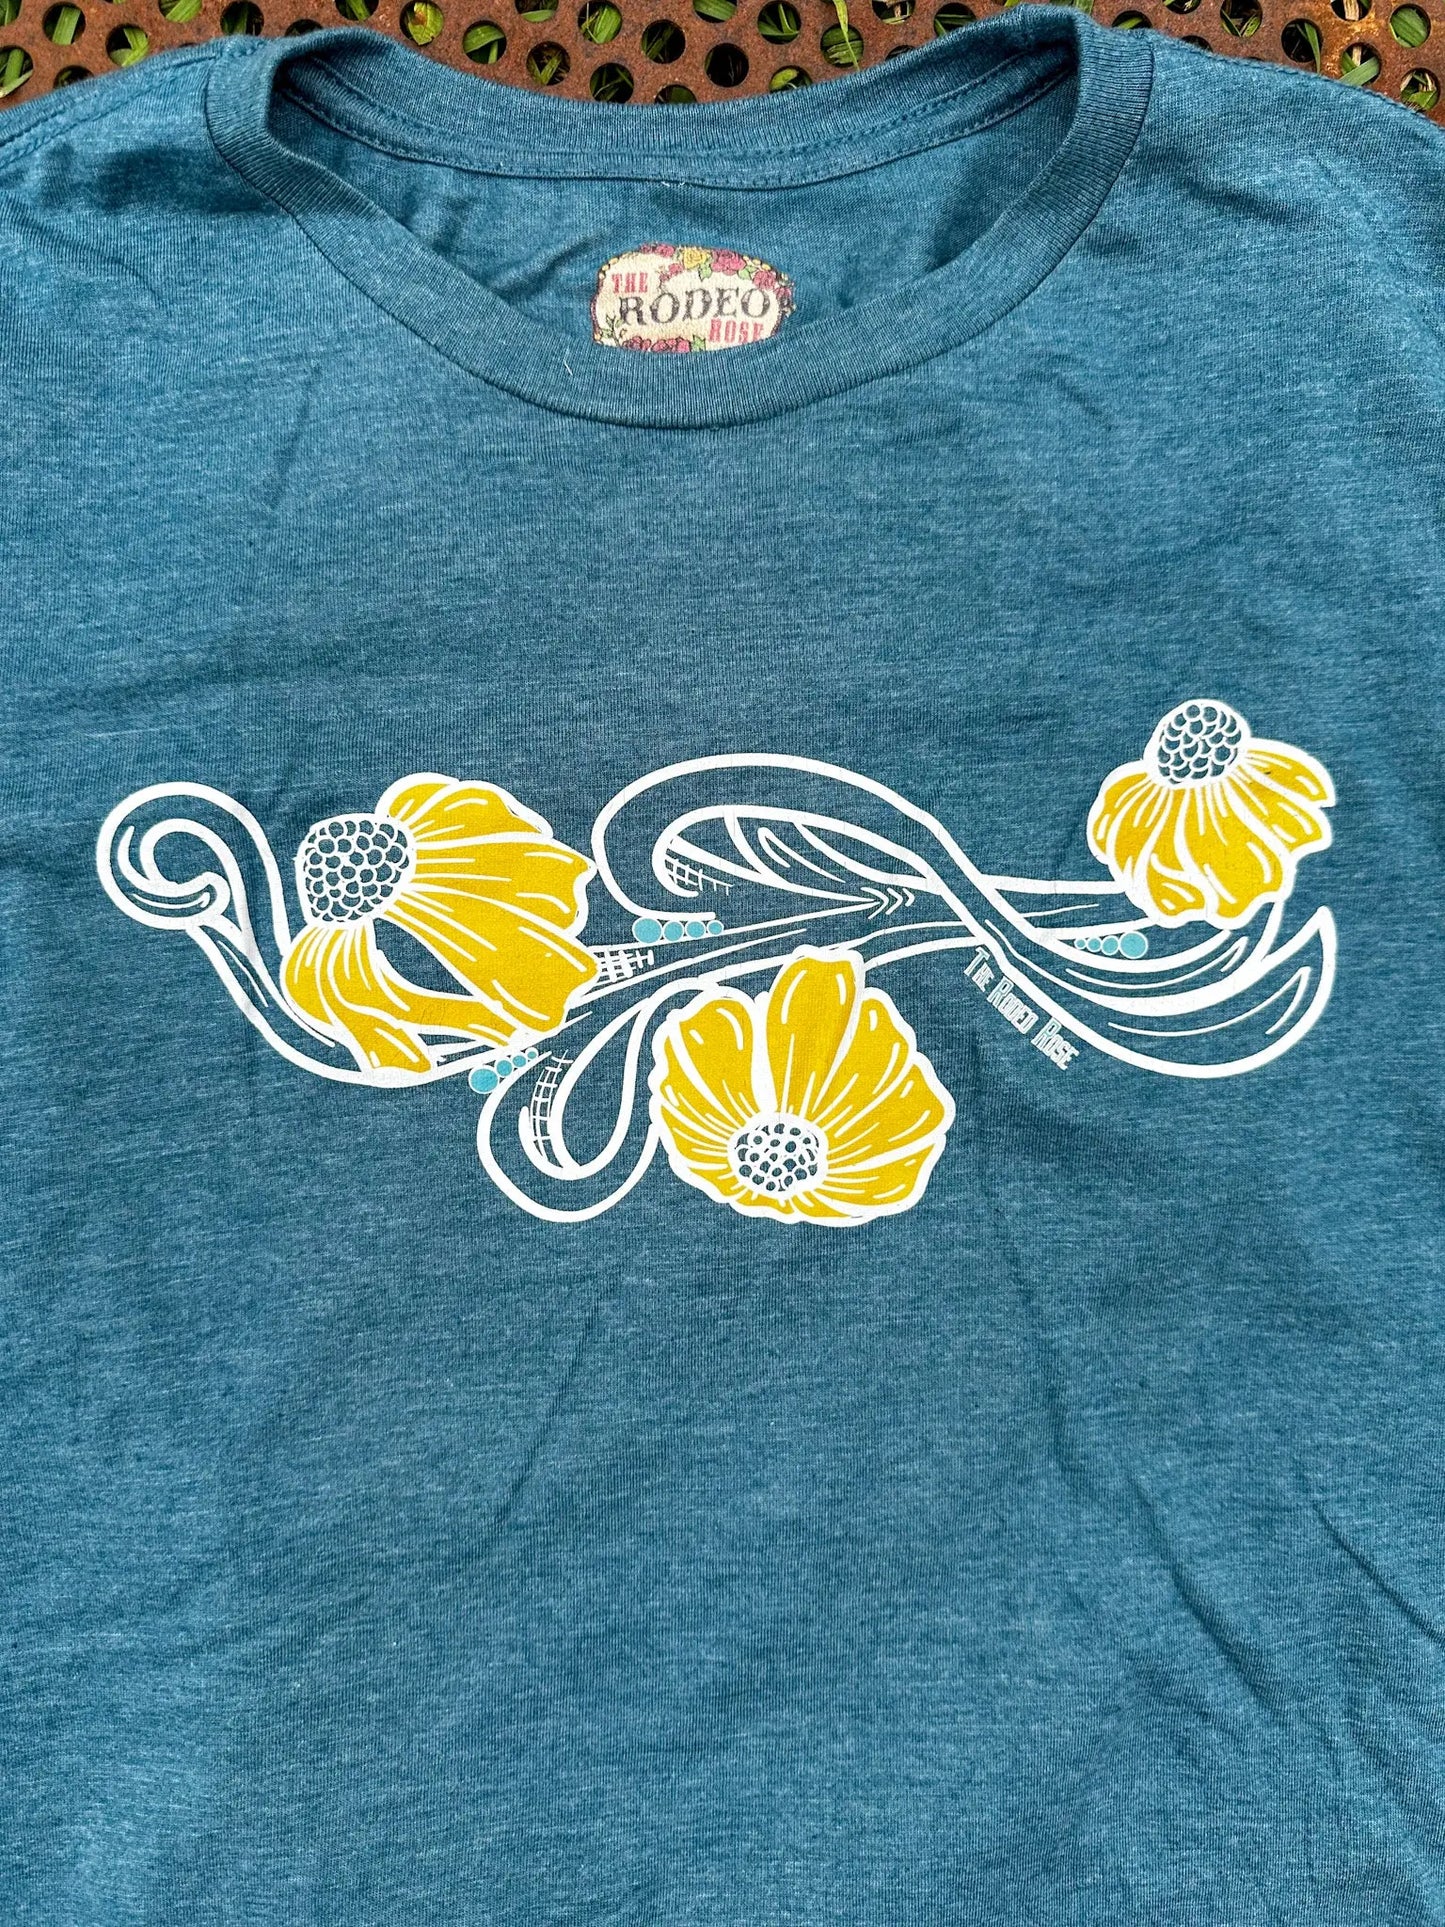 Coneflower Tshirt in heather teal The Rodeo Rose